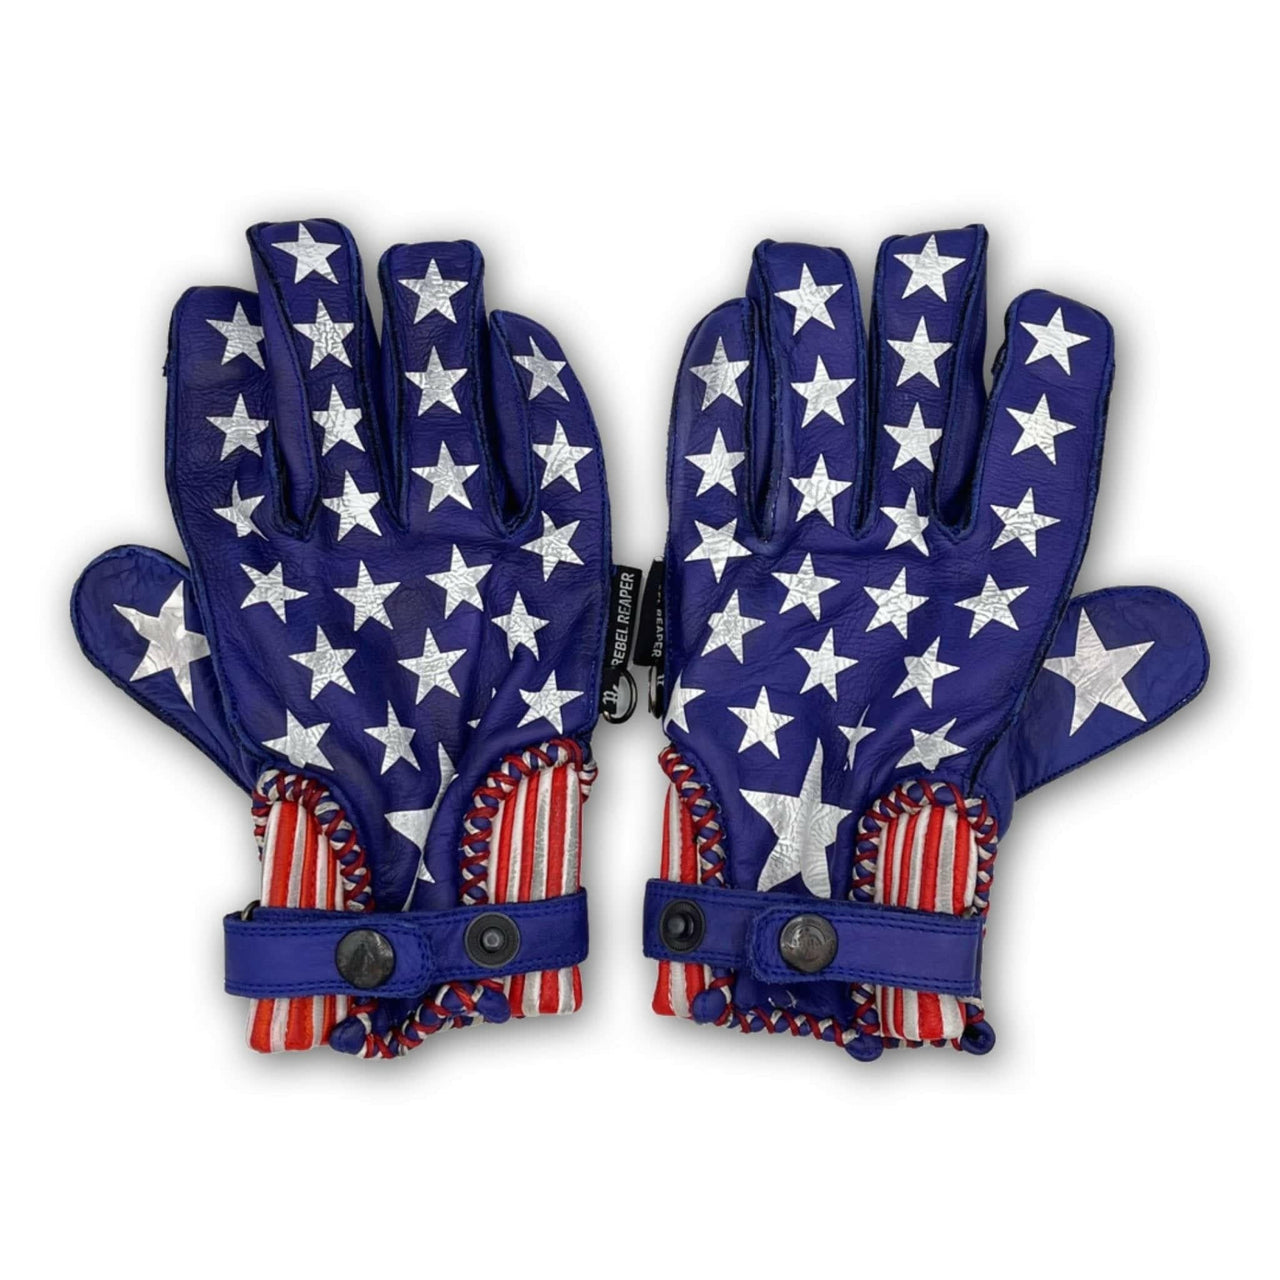 Leather Motorcycle Riding Gloves - Modern Roper - Red | White | Blue | USA - Rebel Reaper Clothing Company Leather Gloves